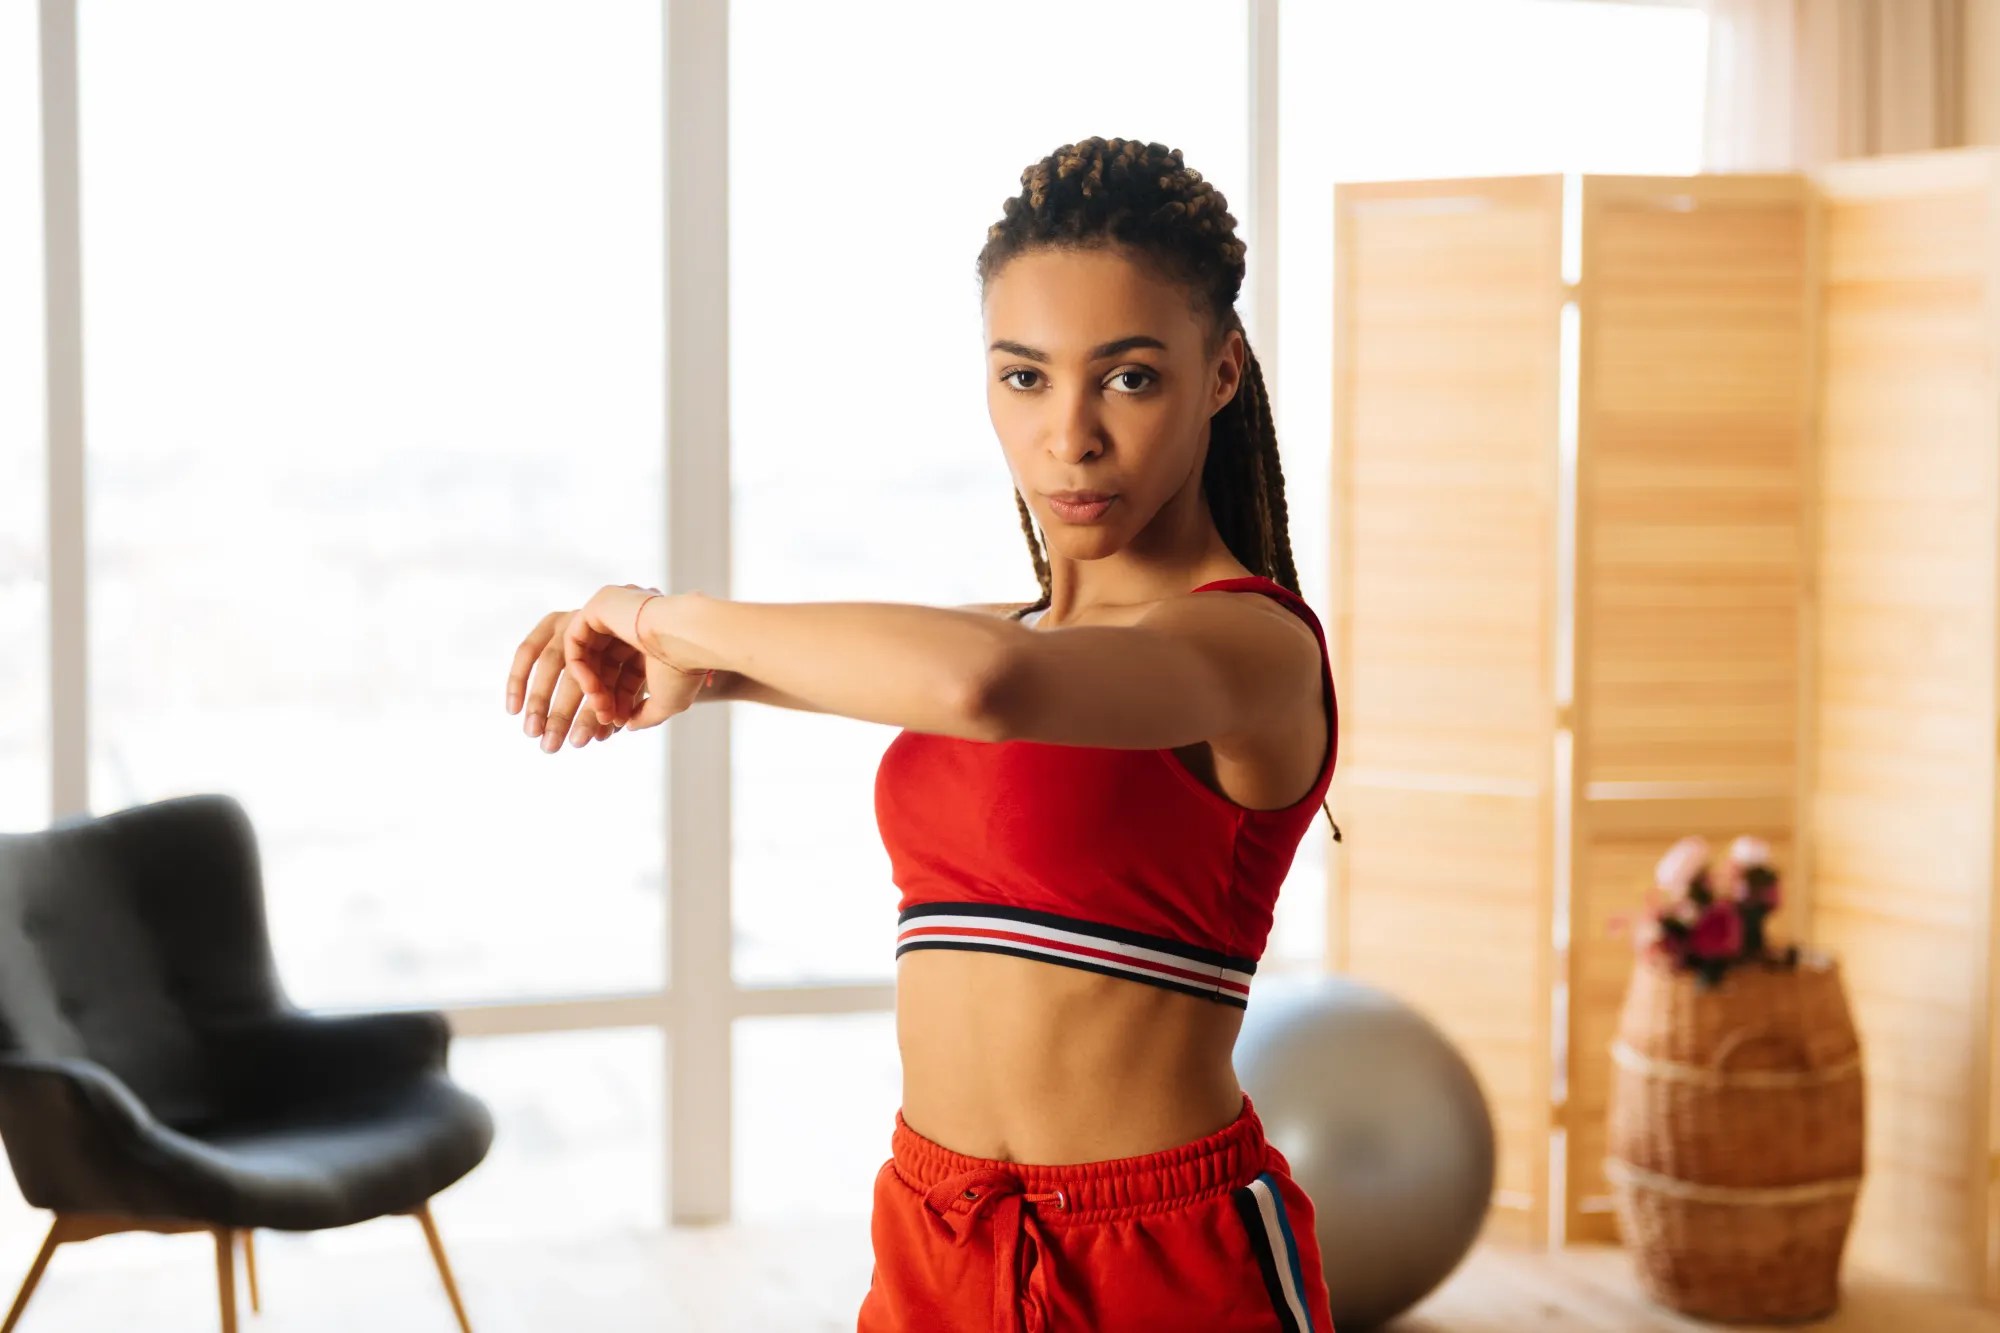 5 Workout Tips For Those Who Don’t Enjoy Working Out